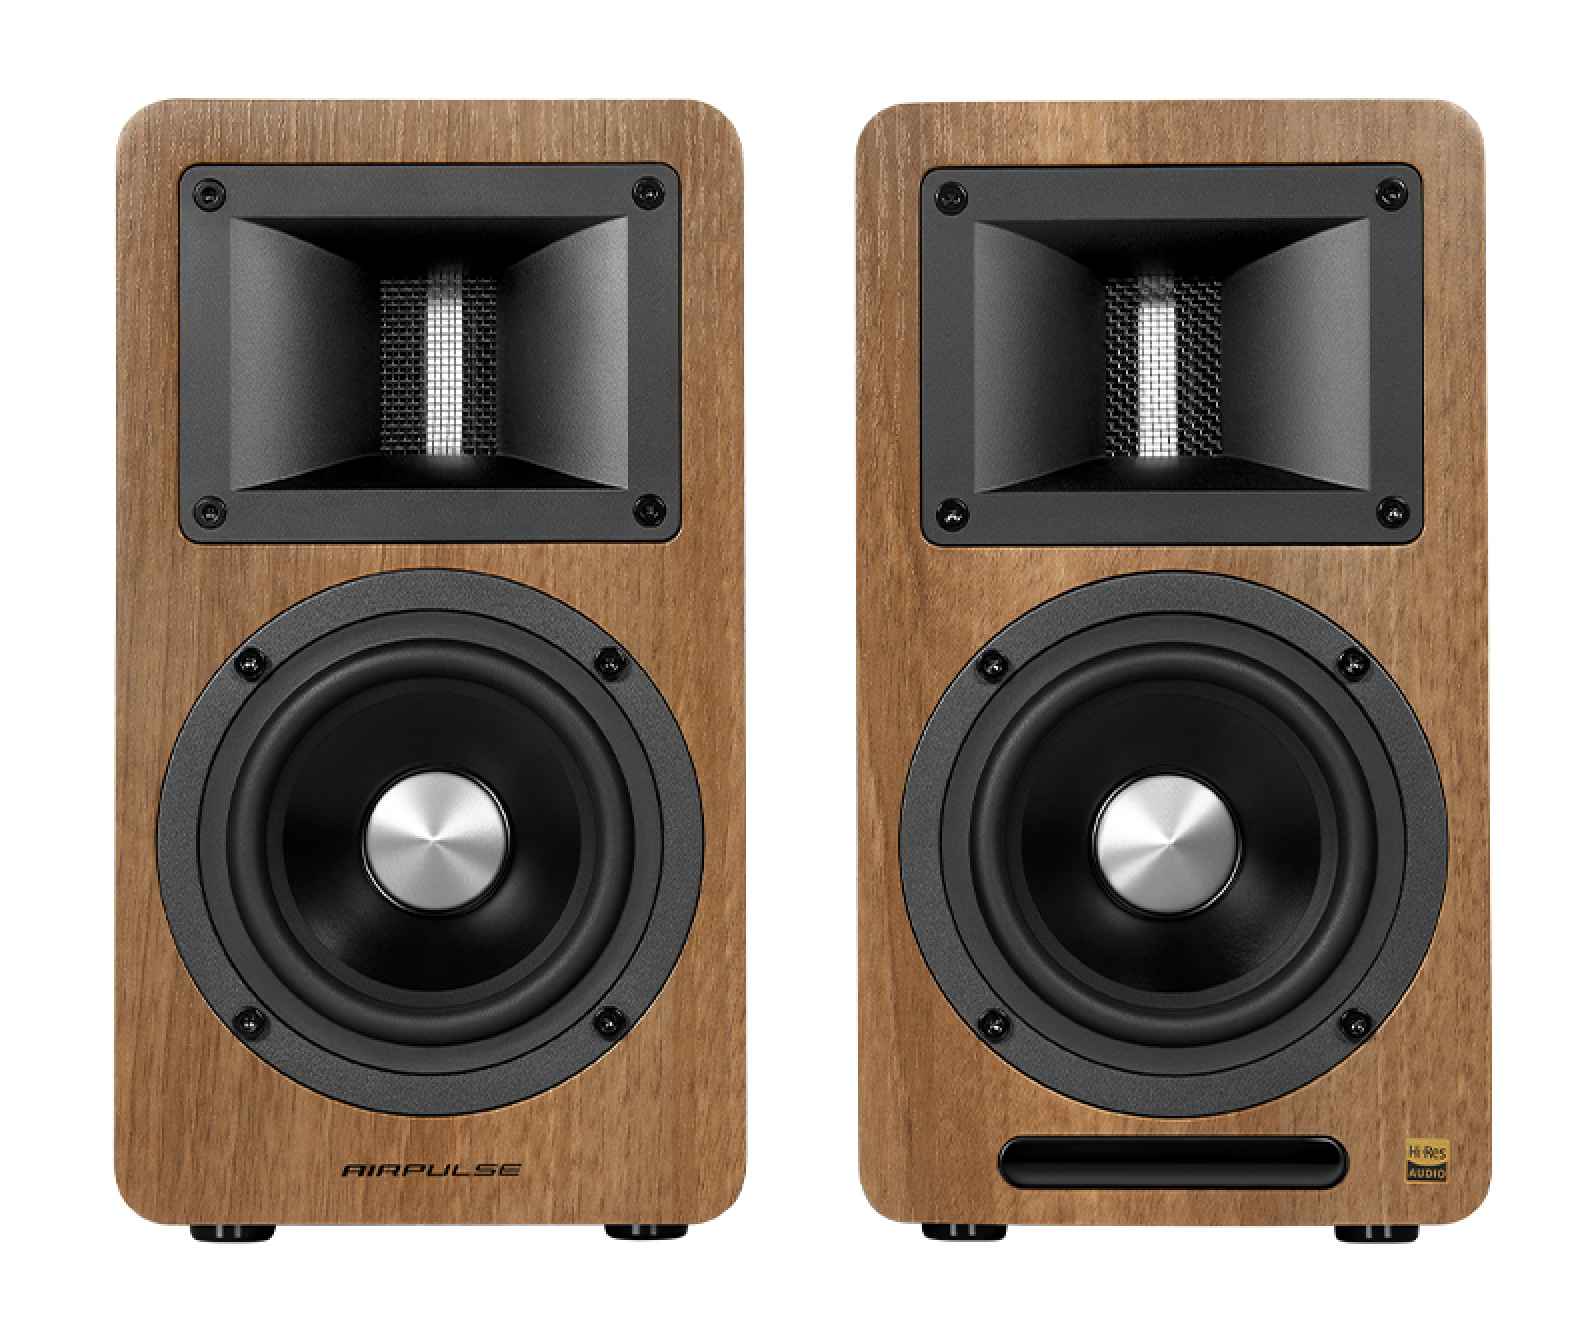 A80 Powered Speakers From Airpulse